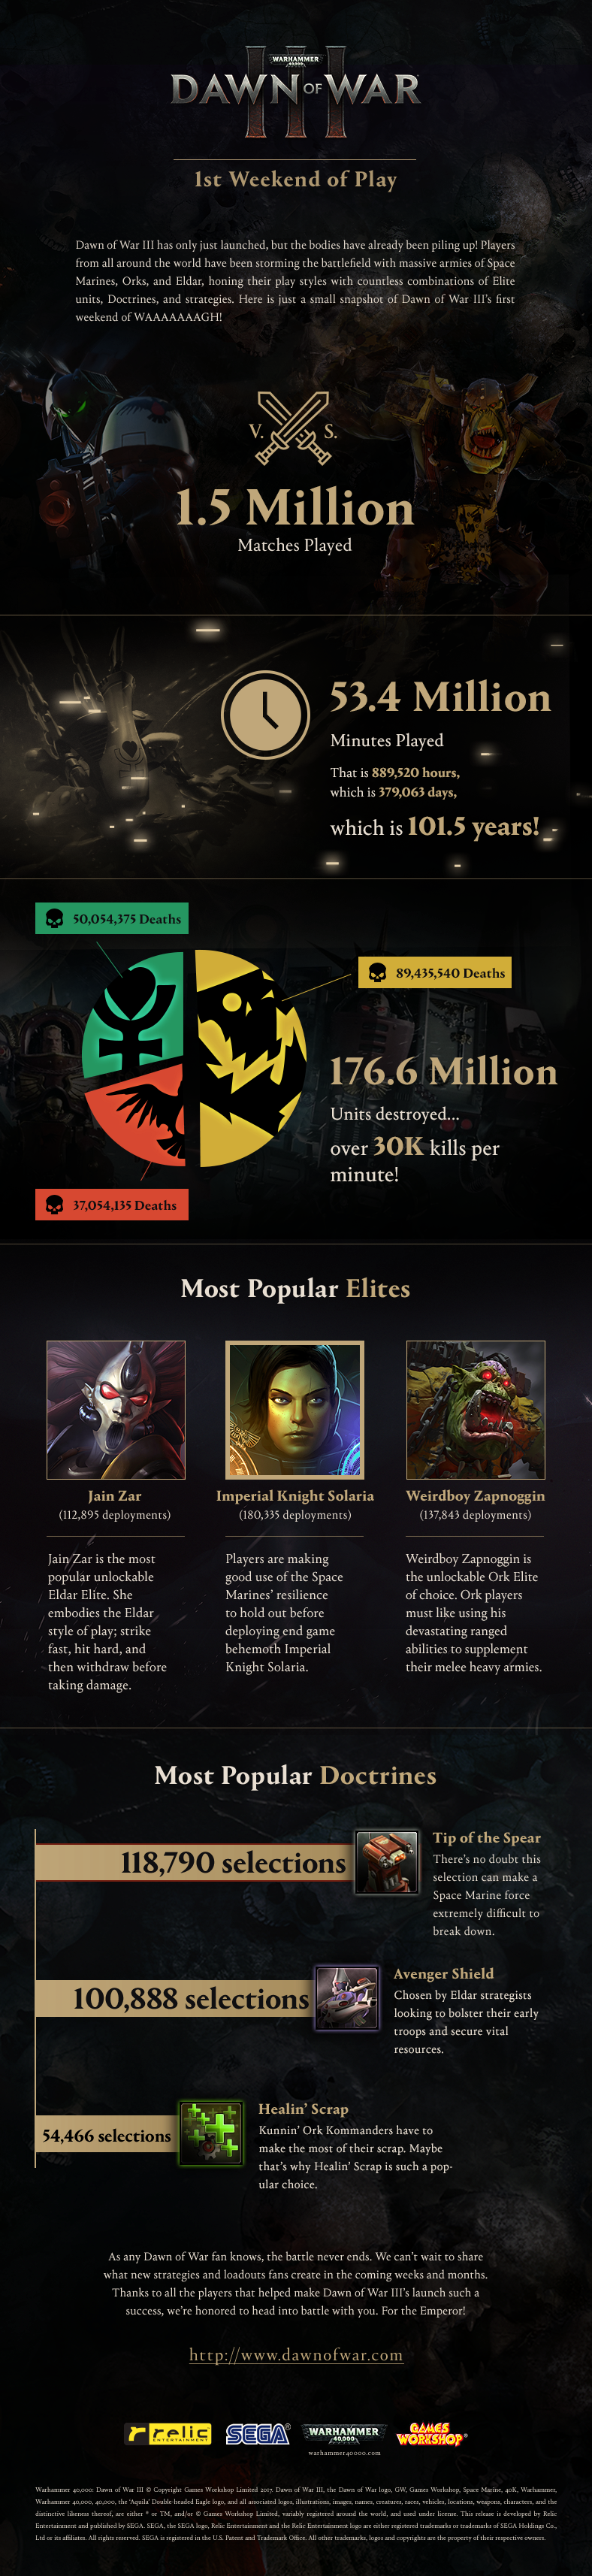 Dow3_Infographic_1stWeekend